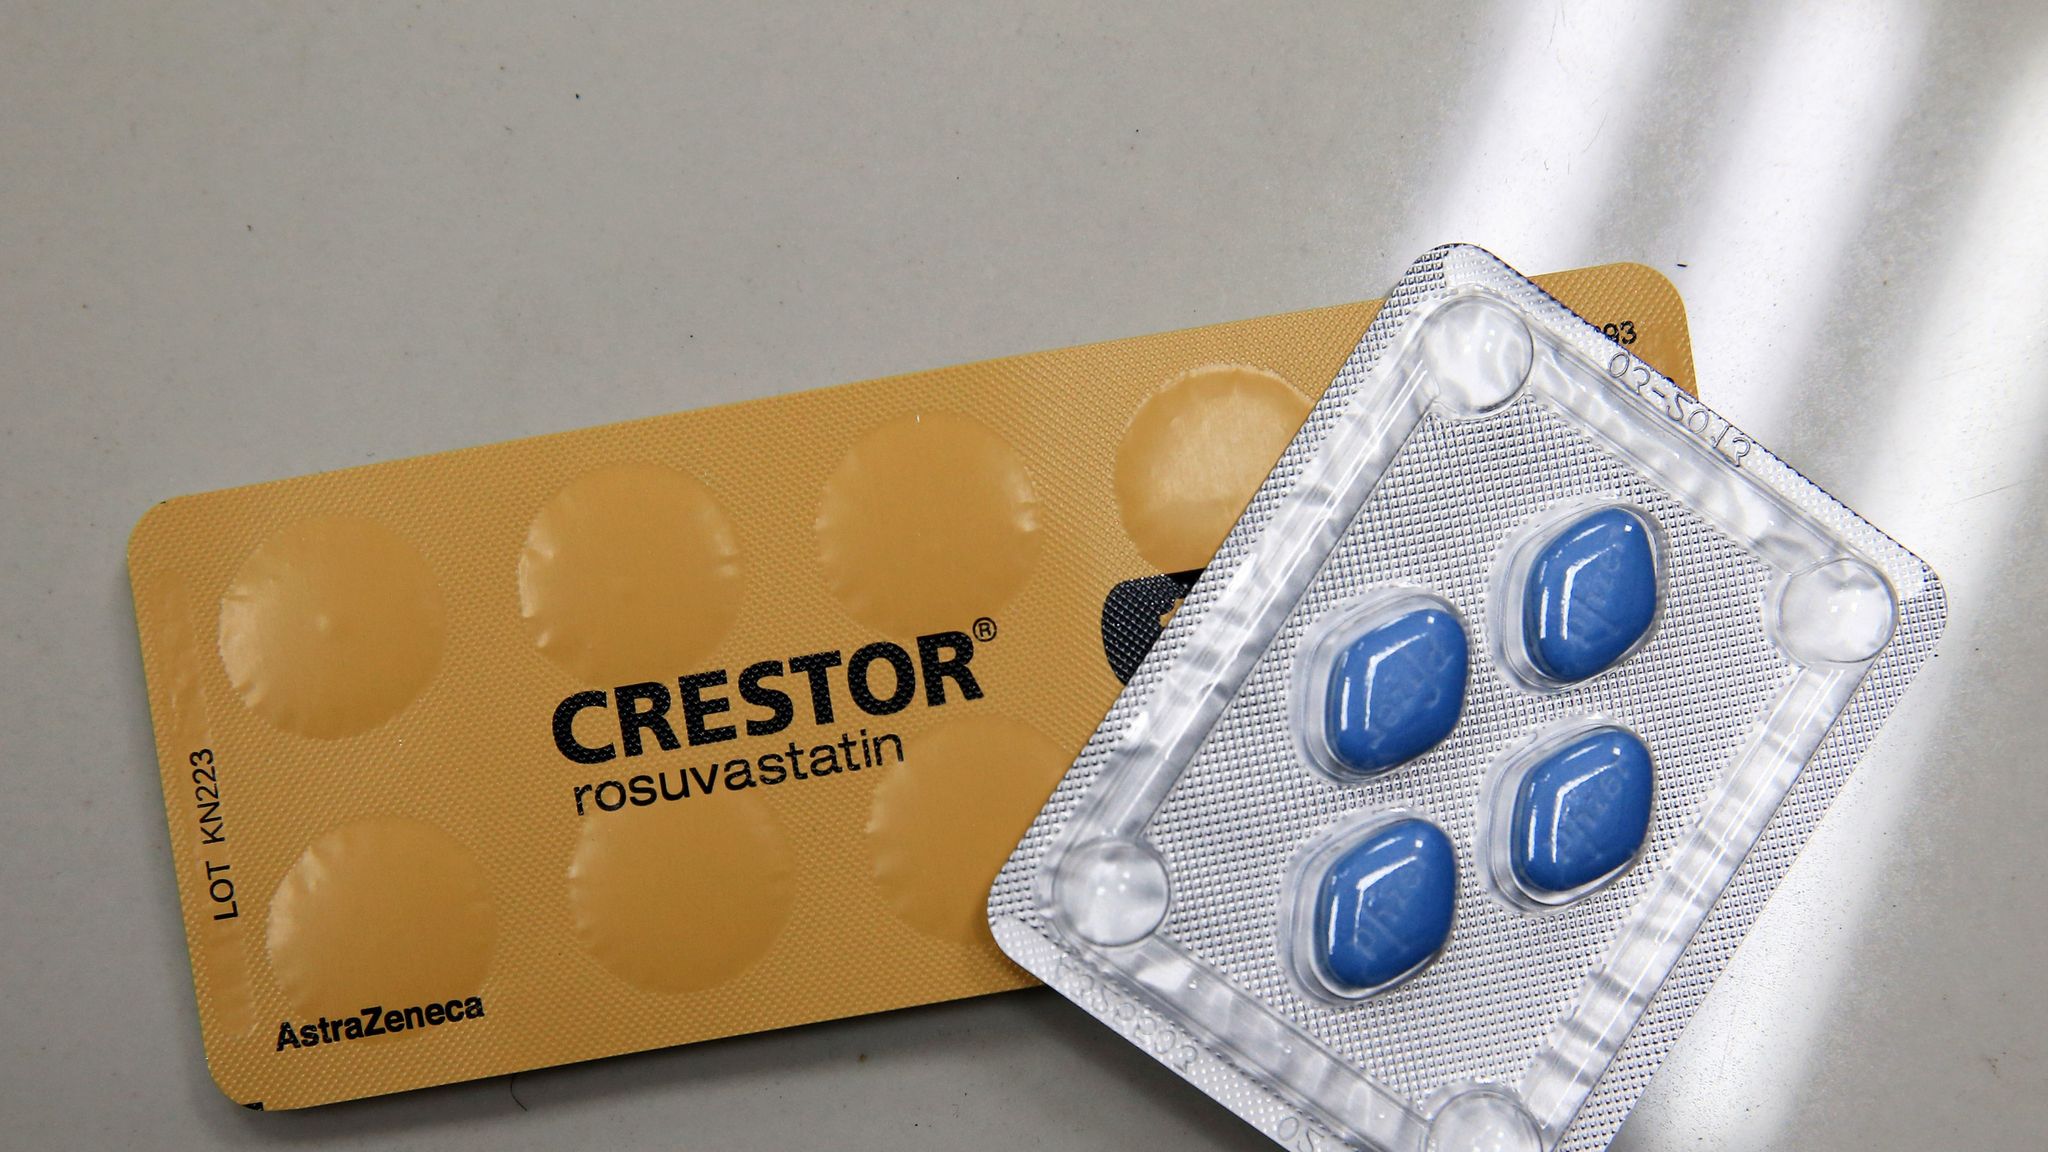 Viagra will be available over the counter in UK, says medicines regulator, Pfizer